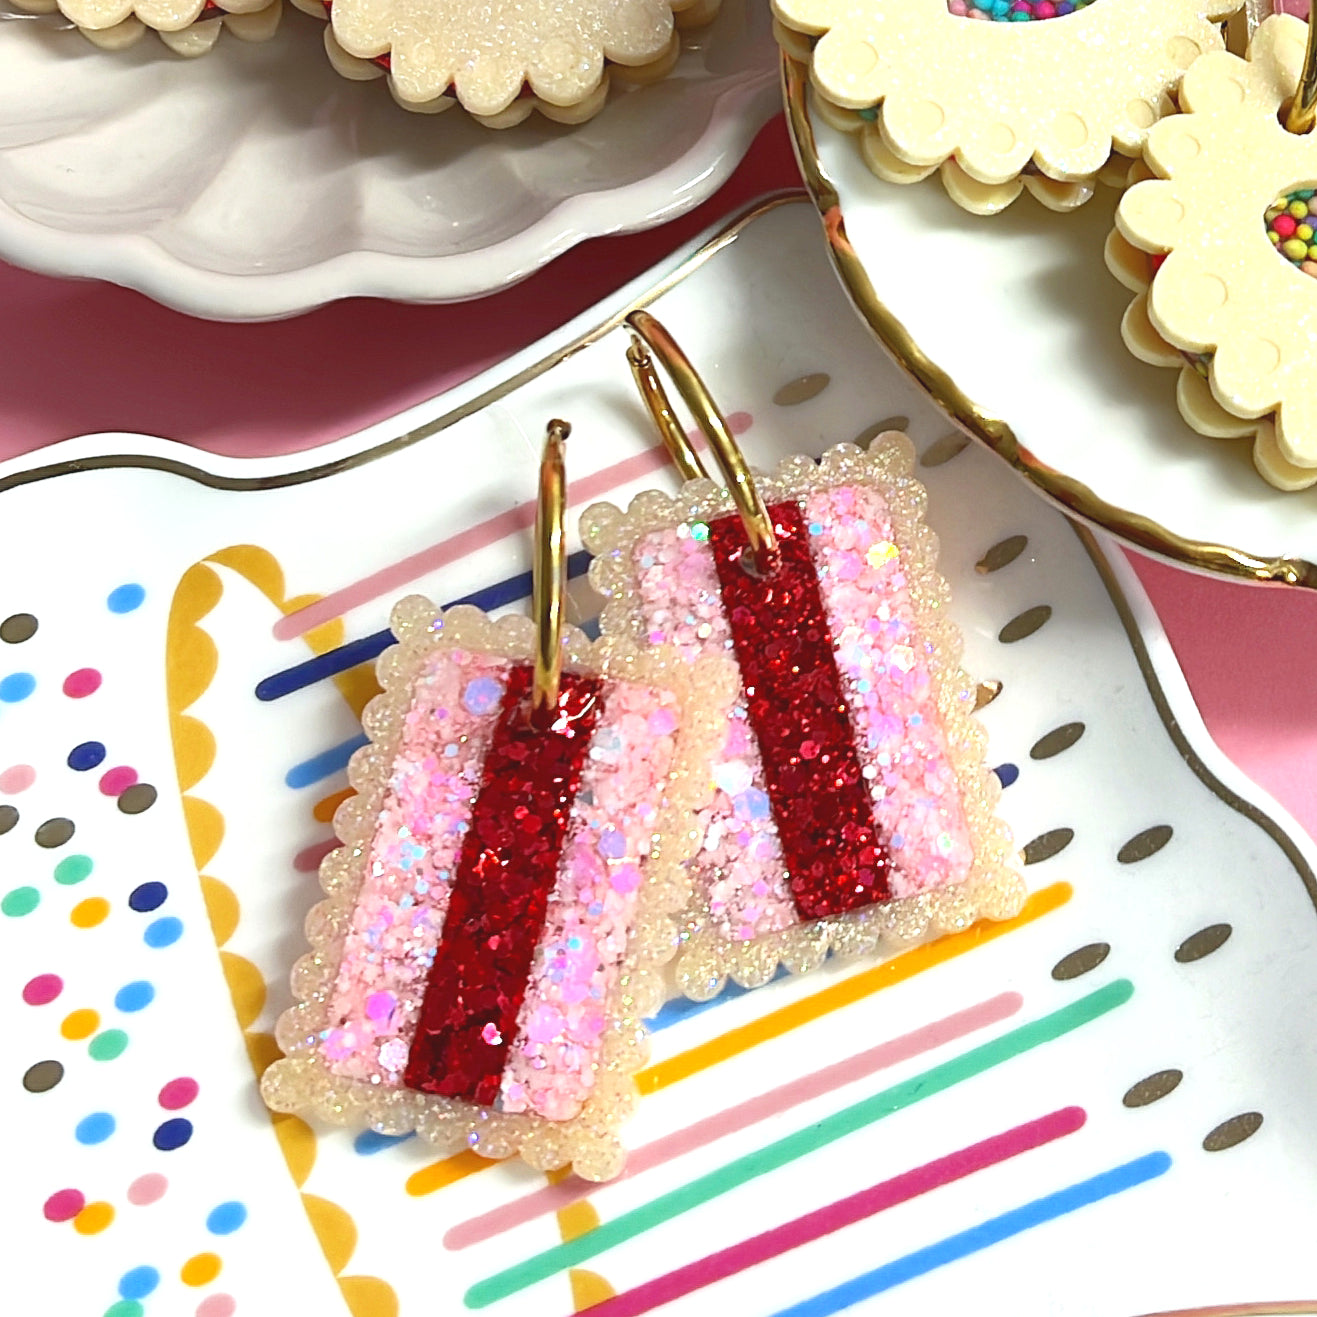 HELLO LITTLE ICED VOVO : Choose silver or gold hoops : Handmade Resin DROP Earrings